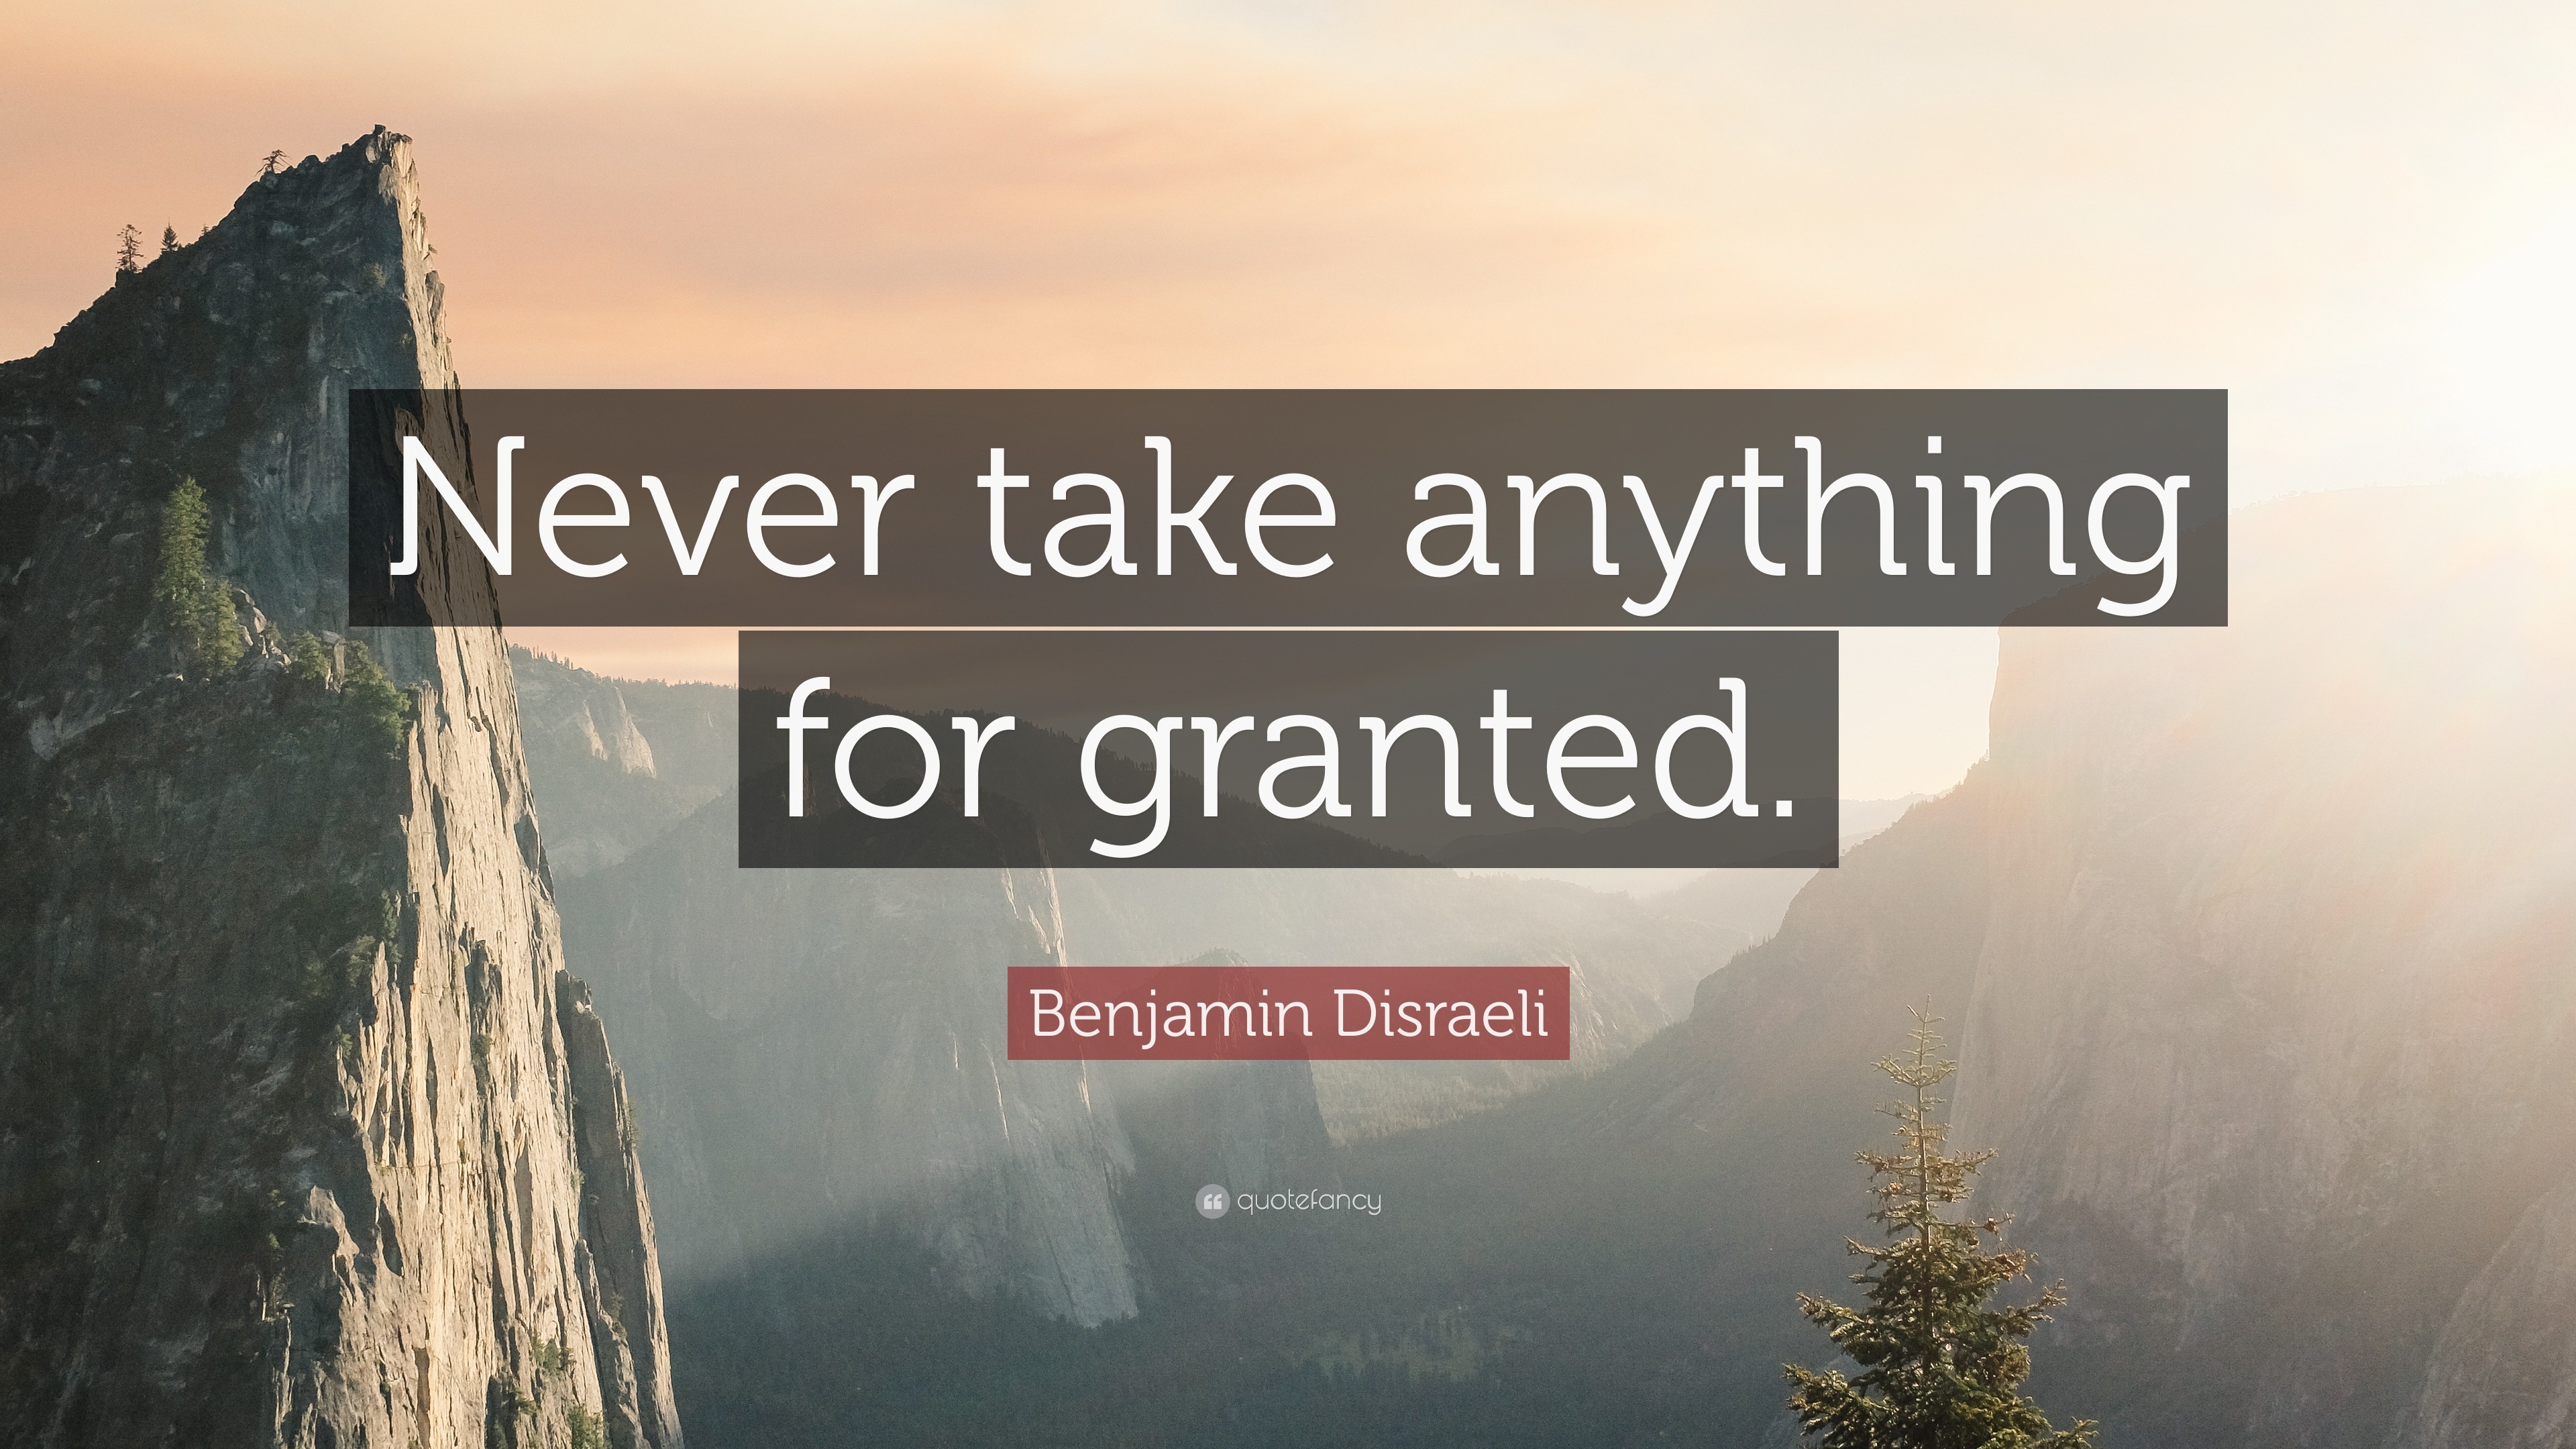 Benjamin Disraeli Quote: “Never Take Anything For Granted.”